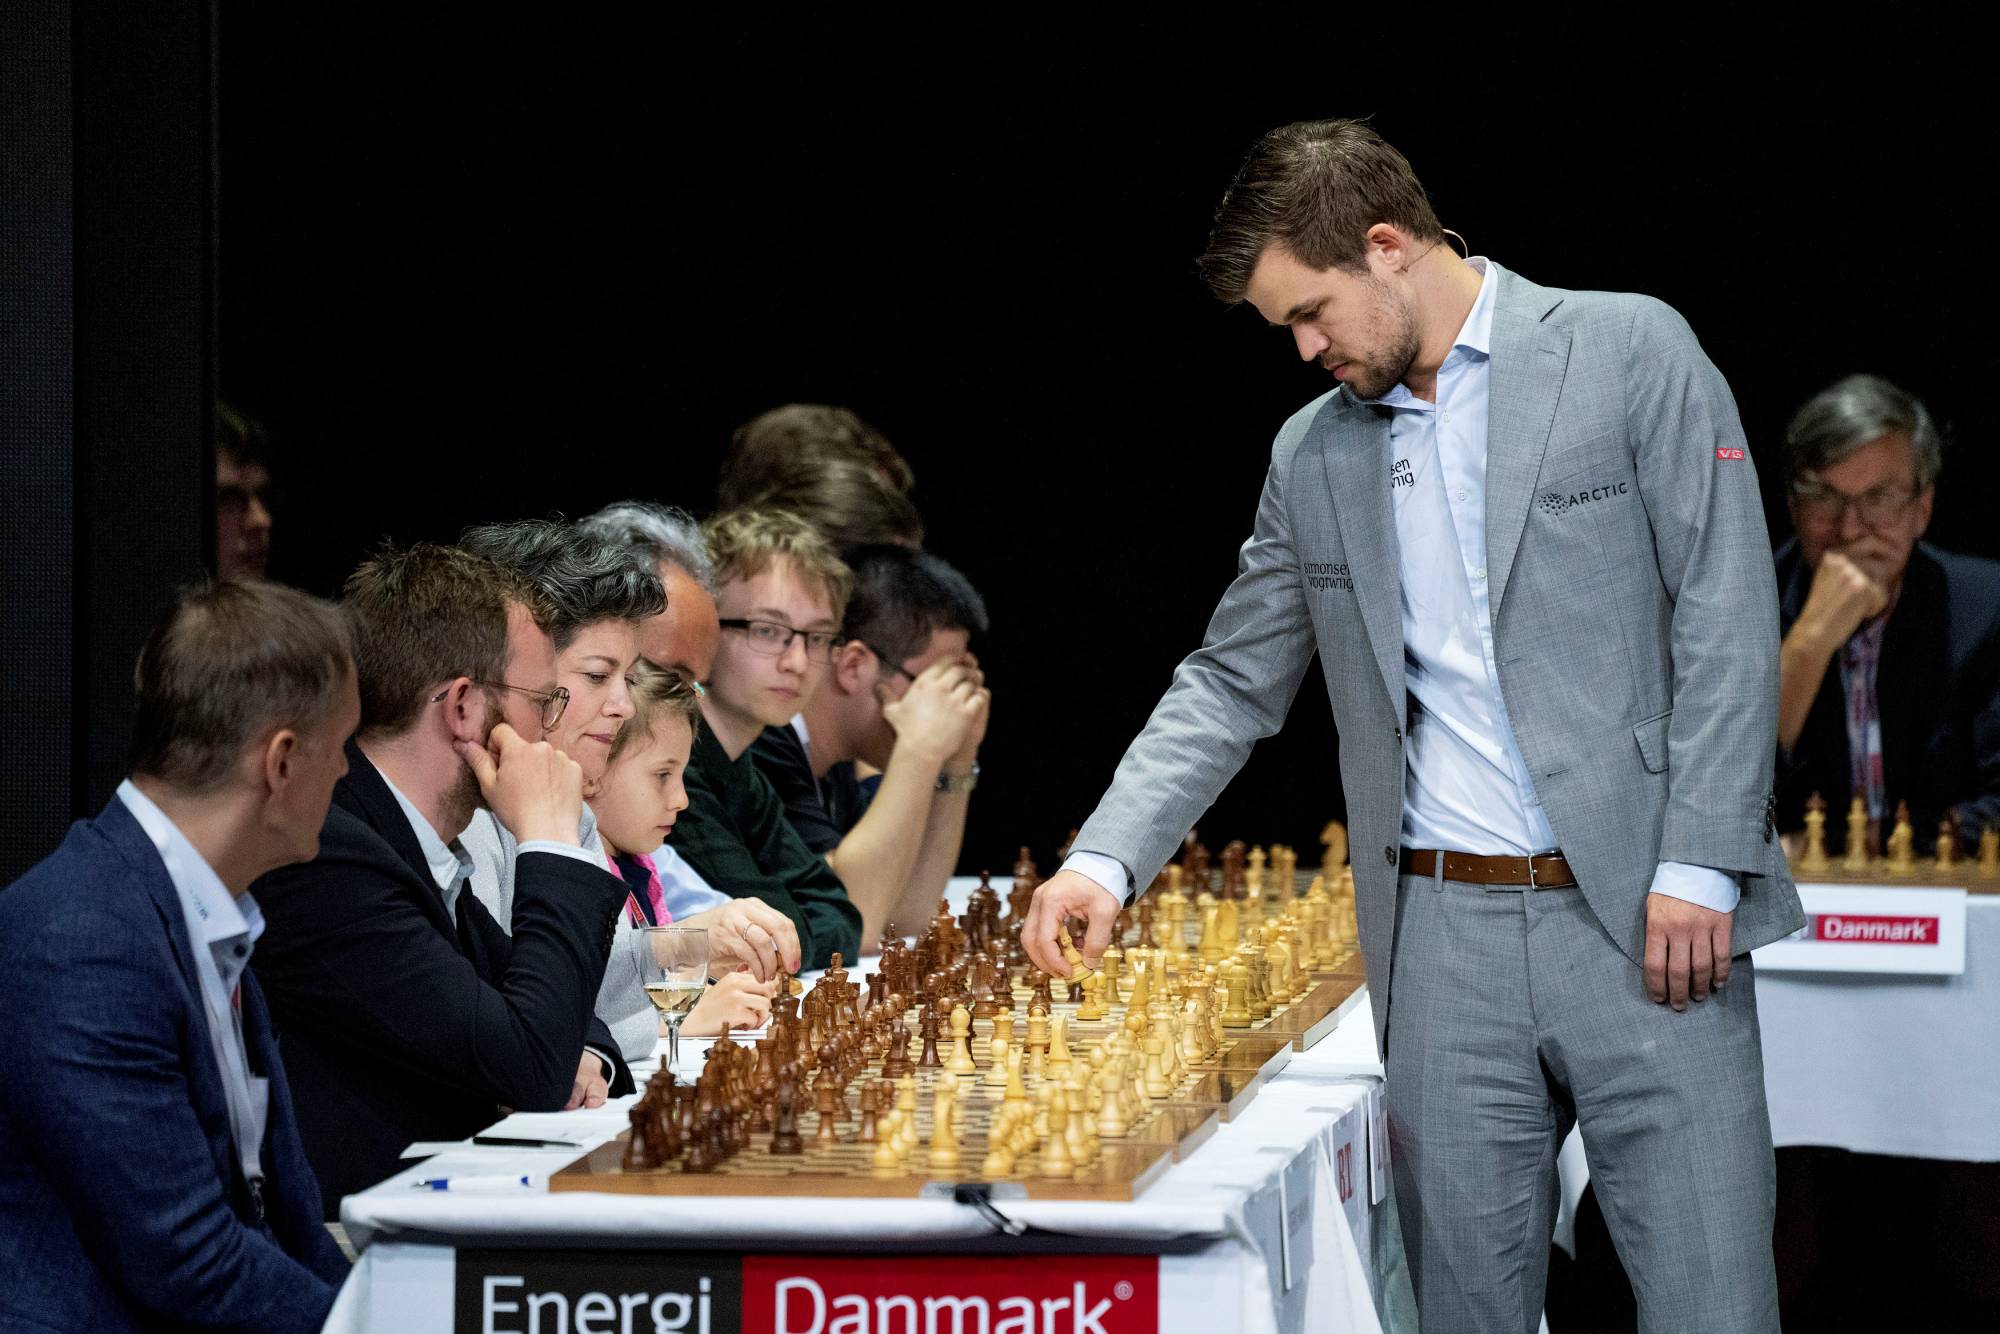 Chess world rattled by cheating allegations after 19-year-old